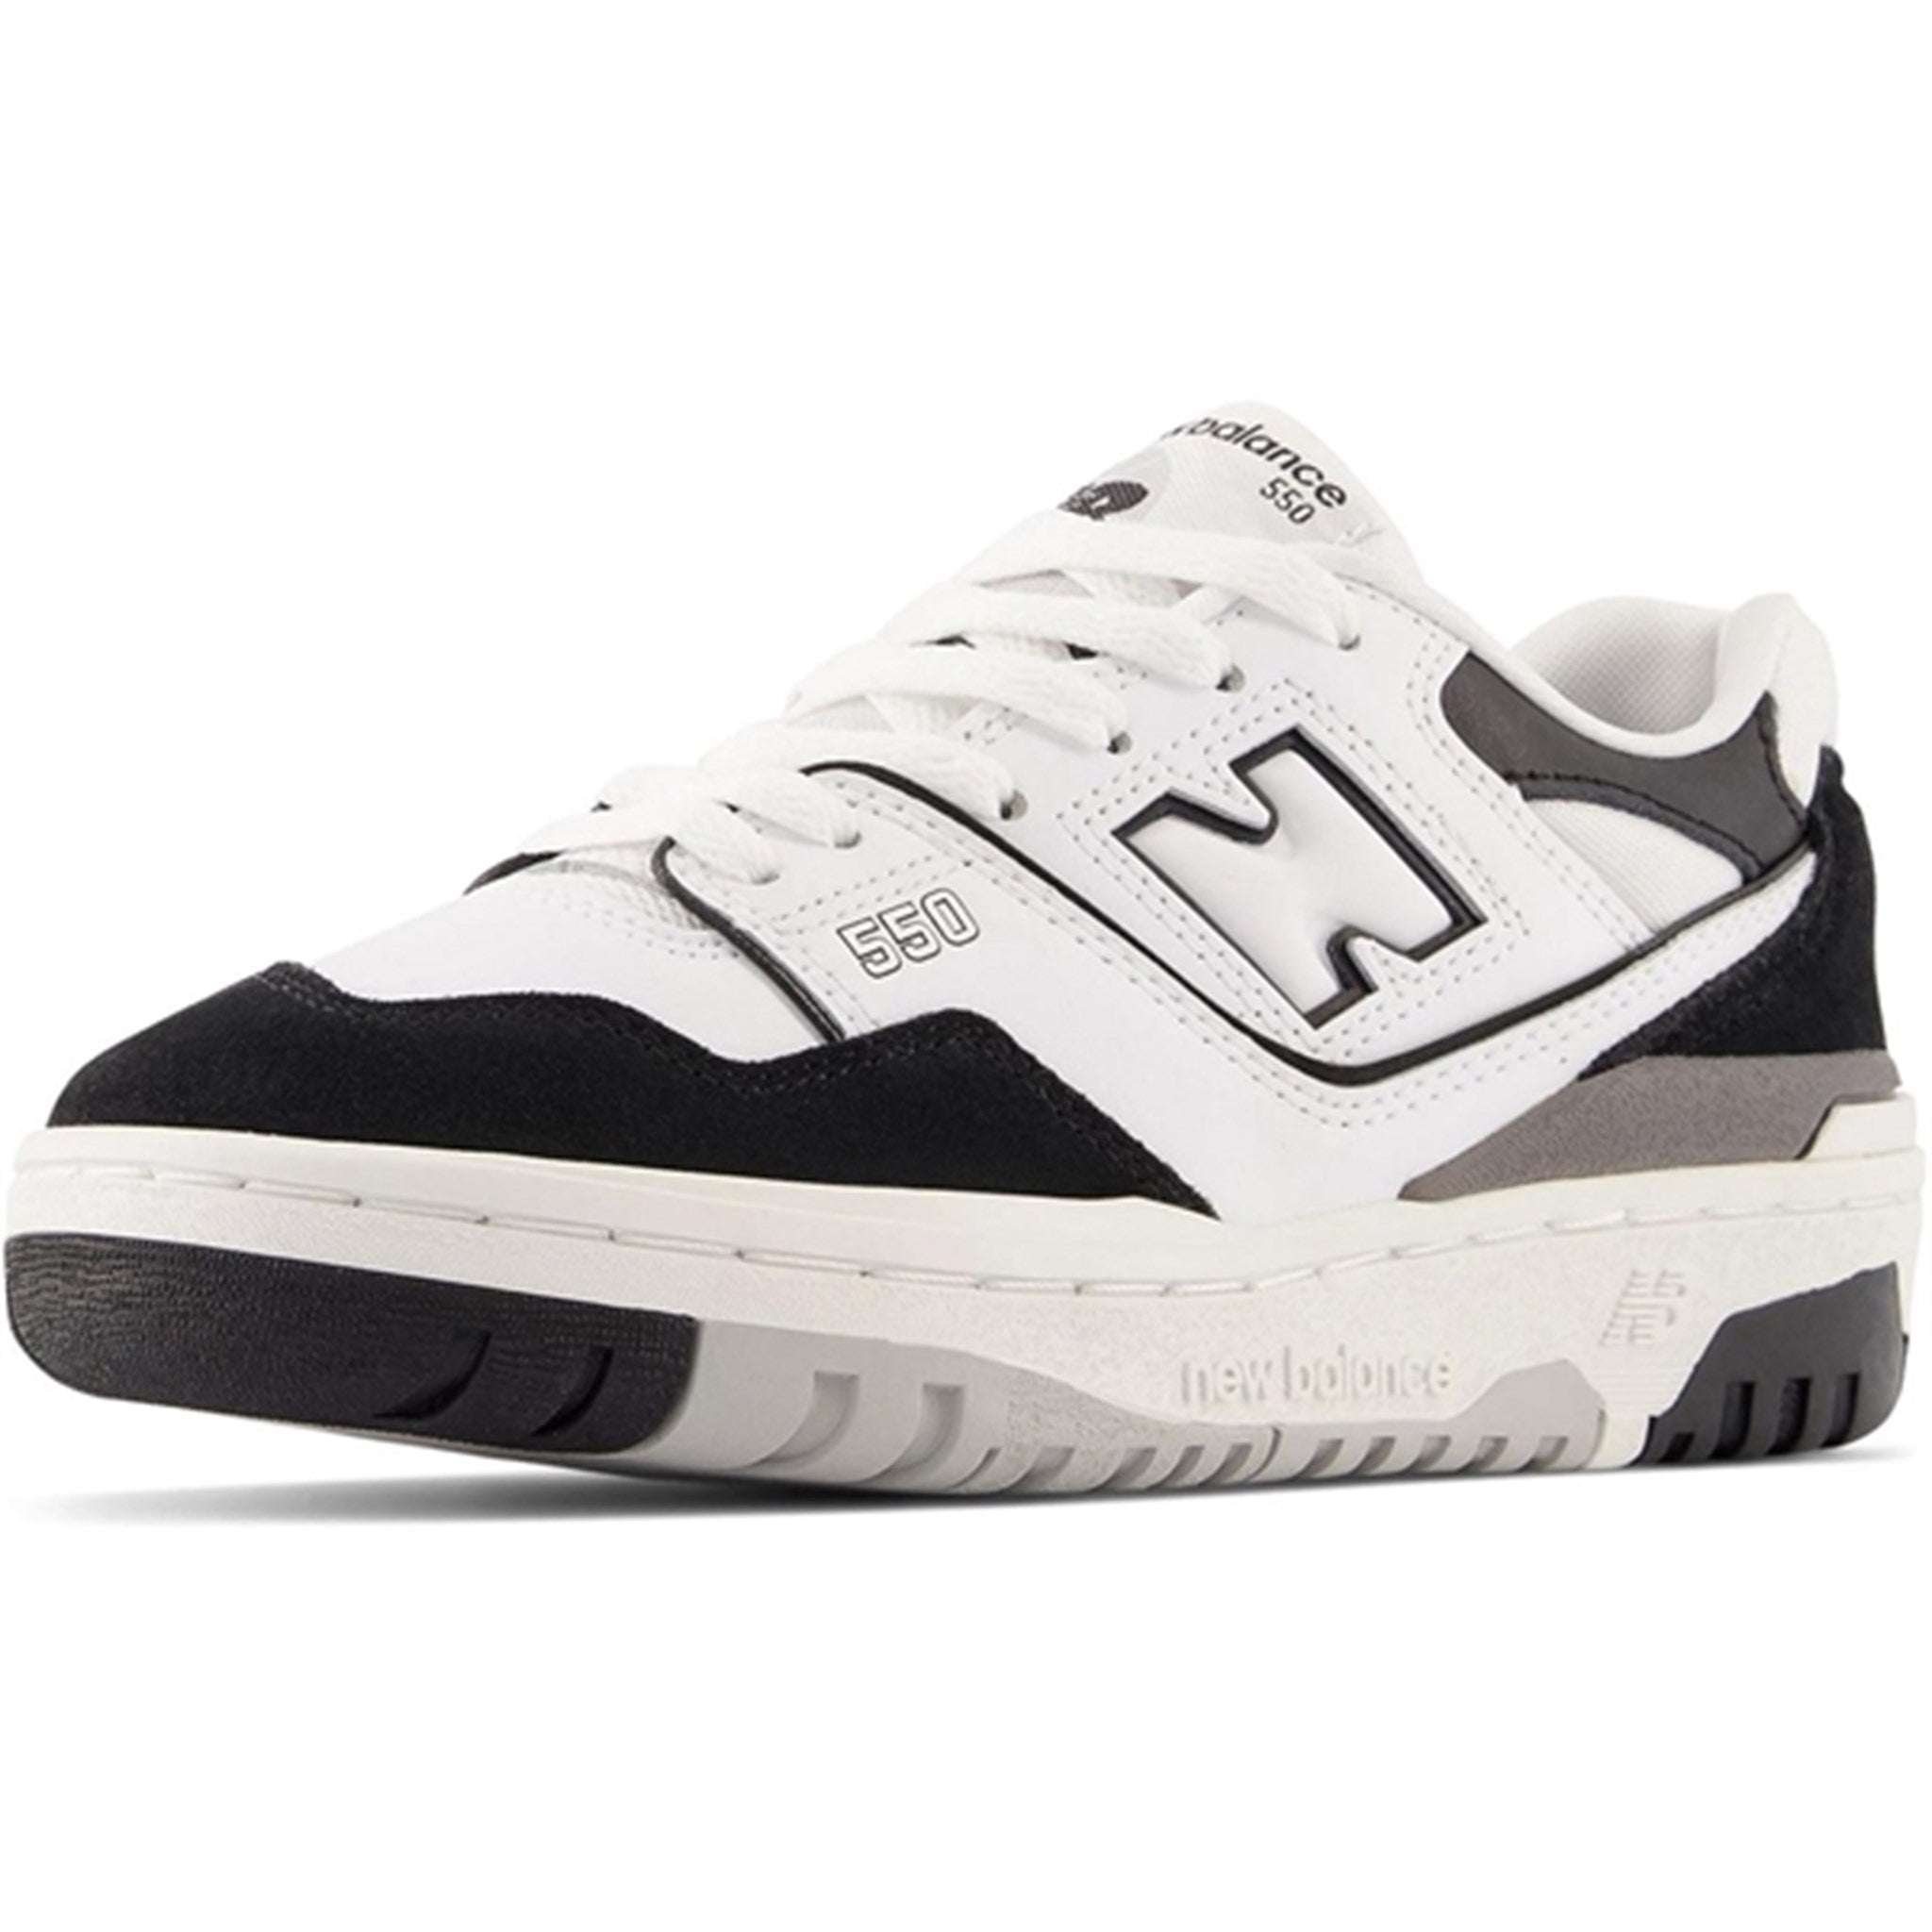 New Balance BB550 Kids Bungee Lace Sneakers White 6